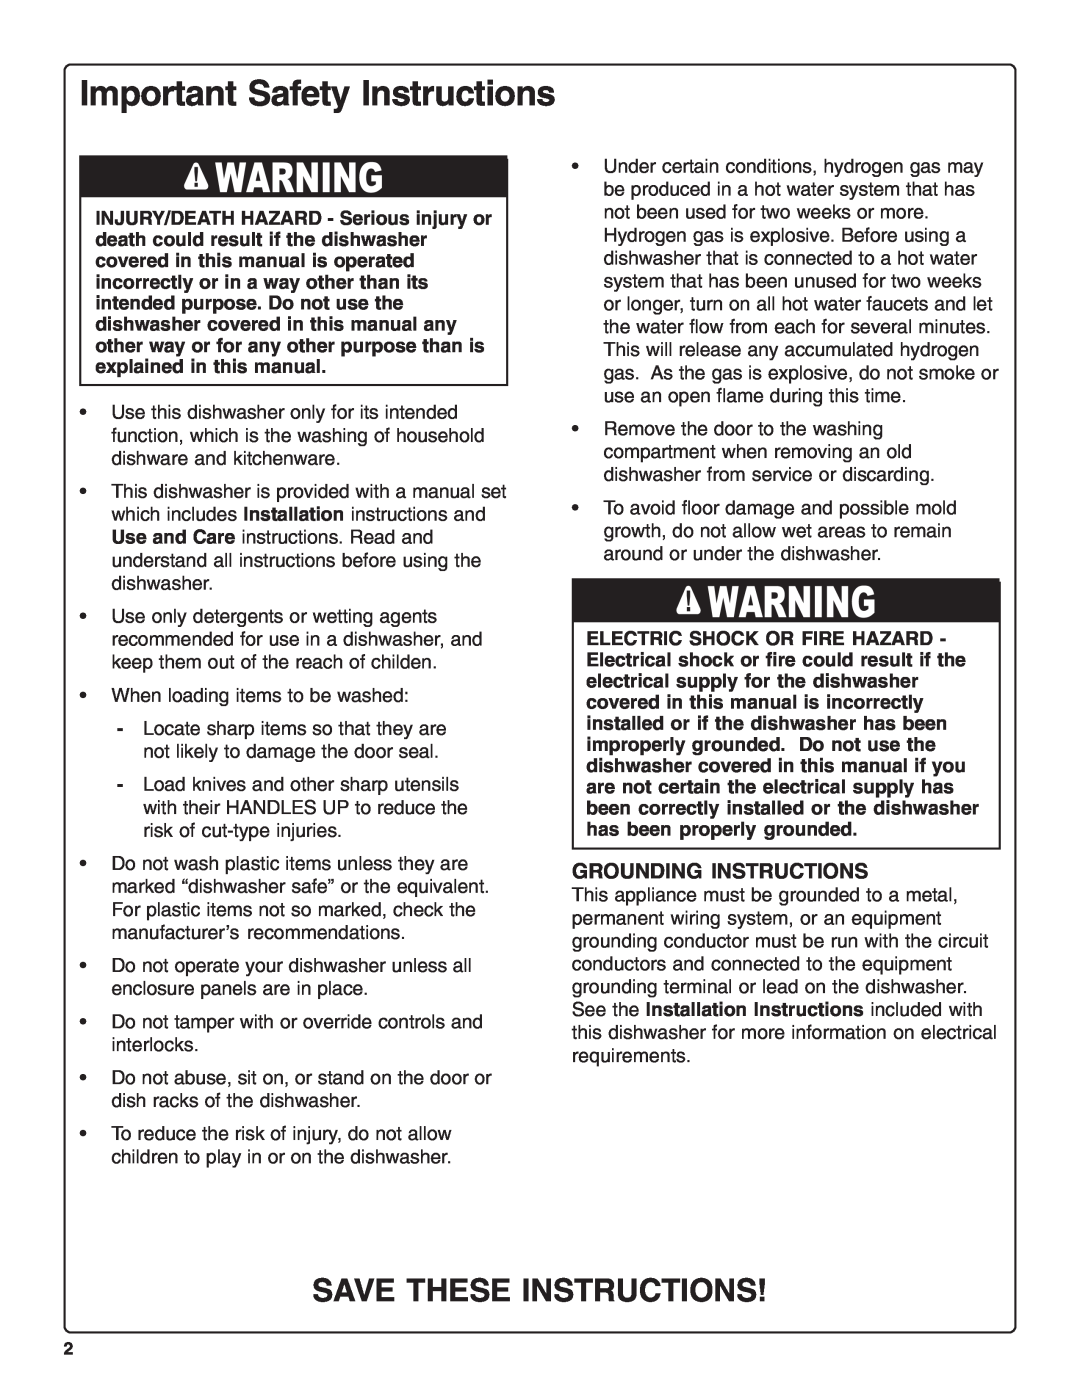 Thermador DWHD94BF manual Important Safety Instructions, Save These Instructions, Grounding Instructions 